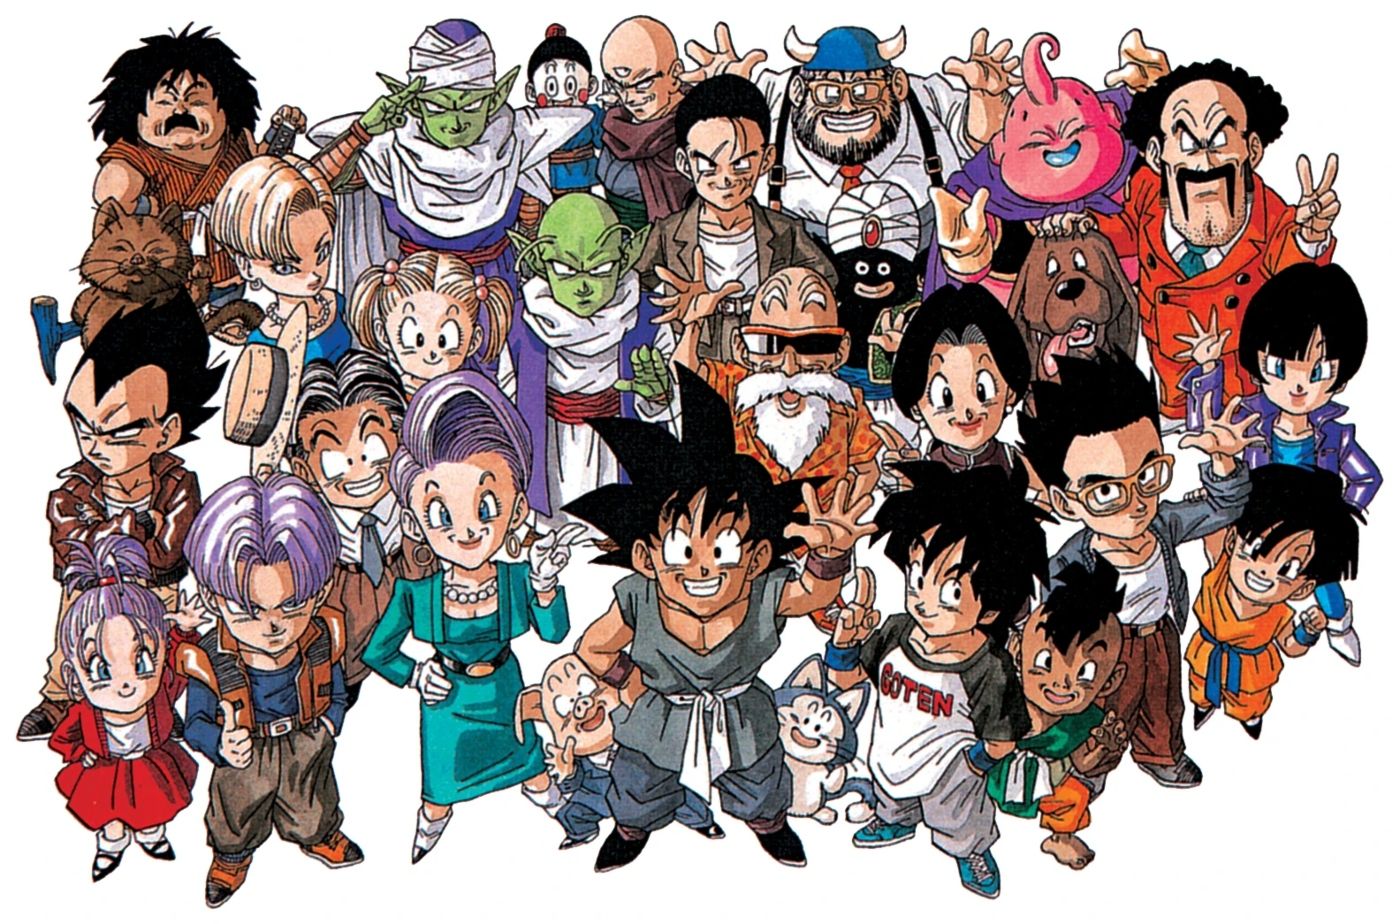 Every main character in Dragon Ball gathered together in End of Z.